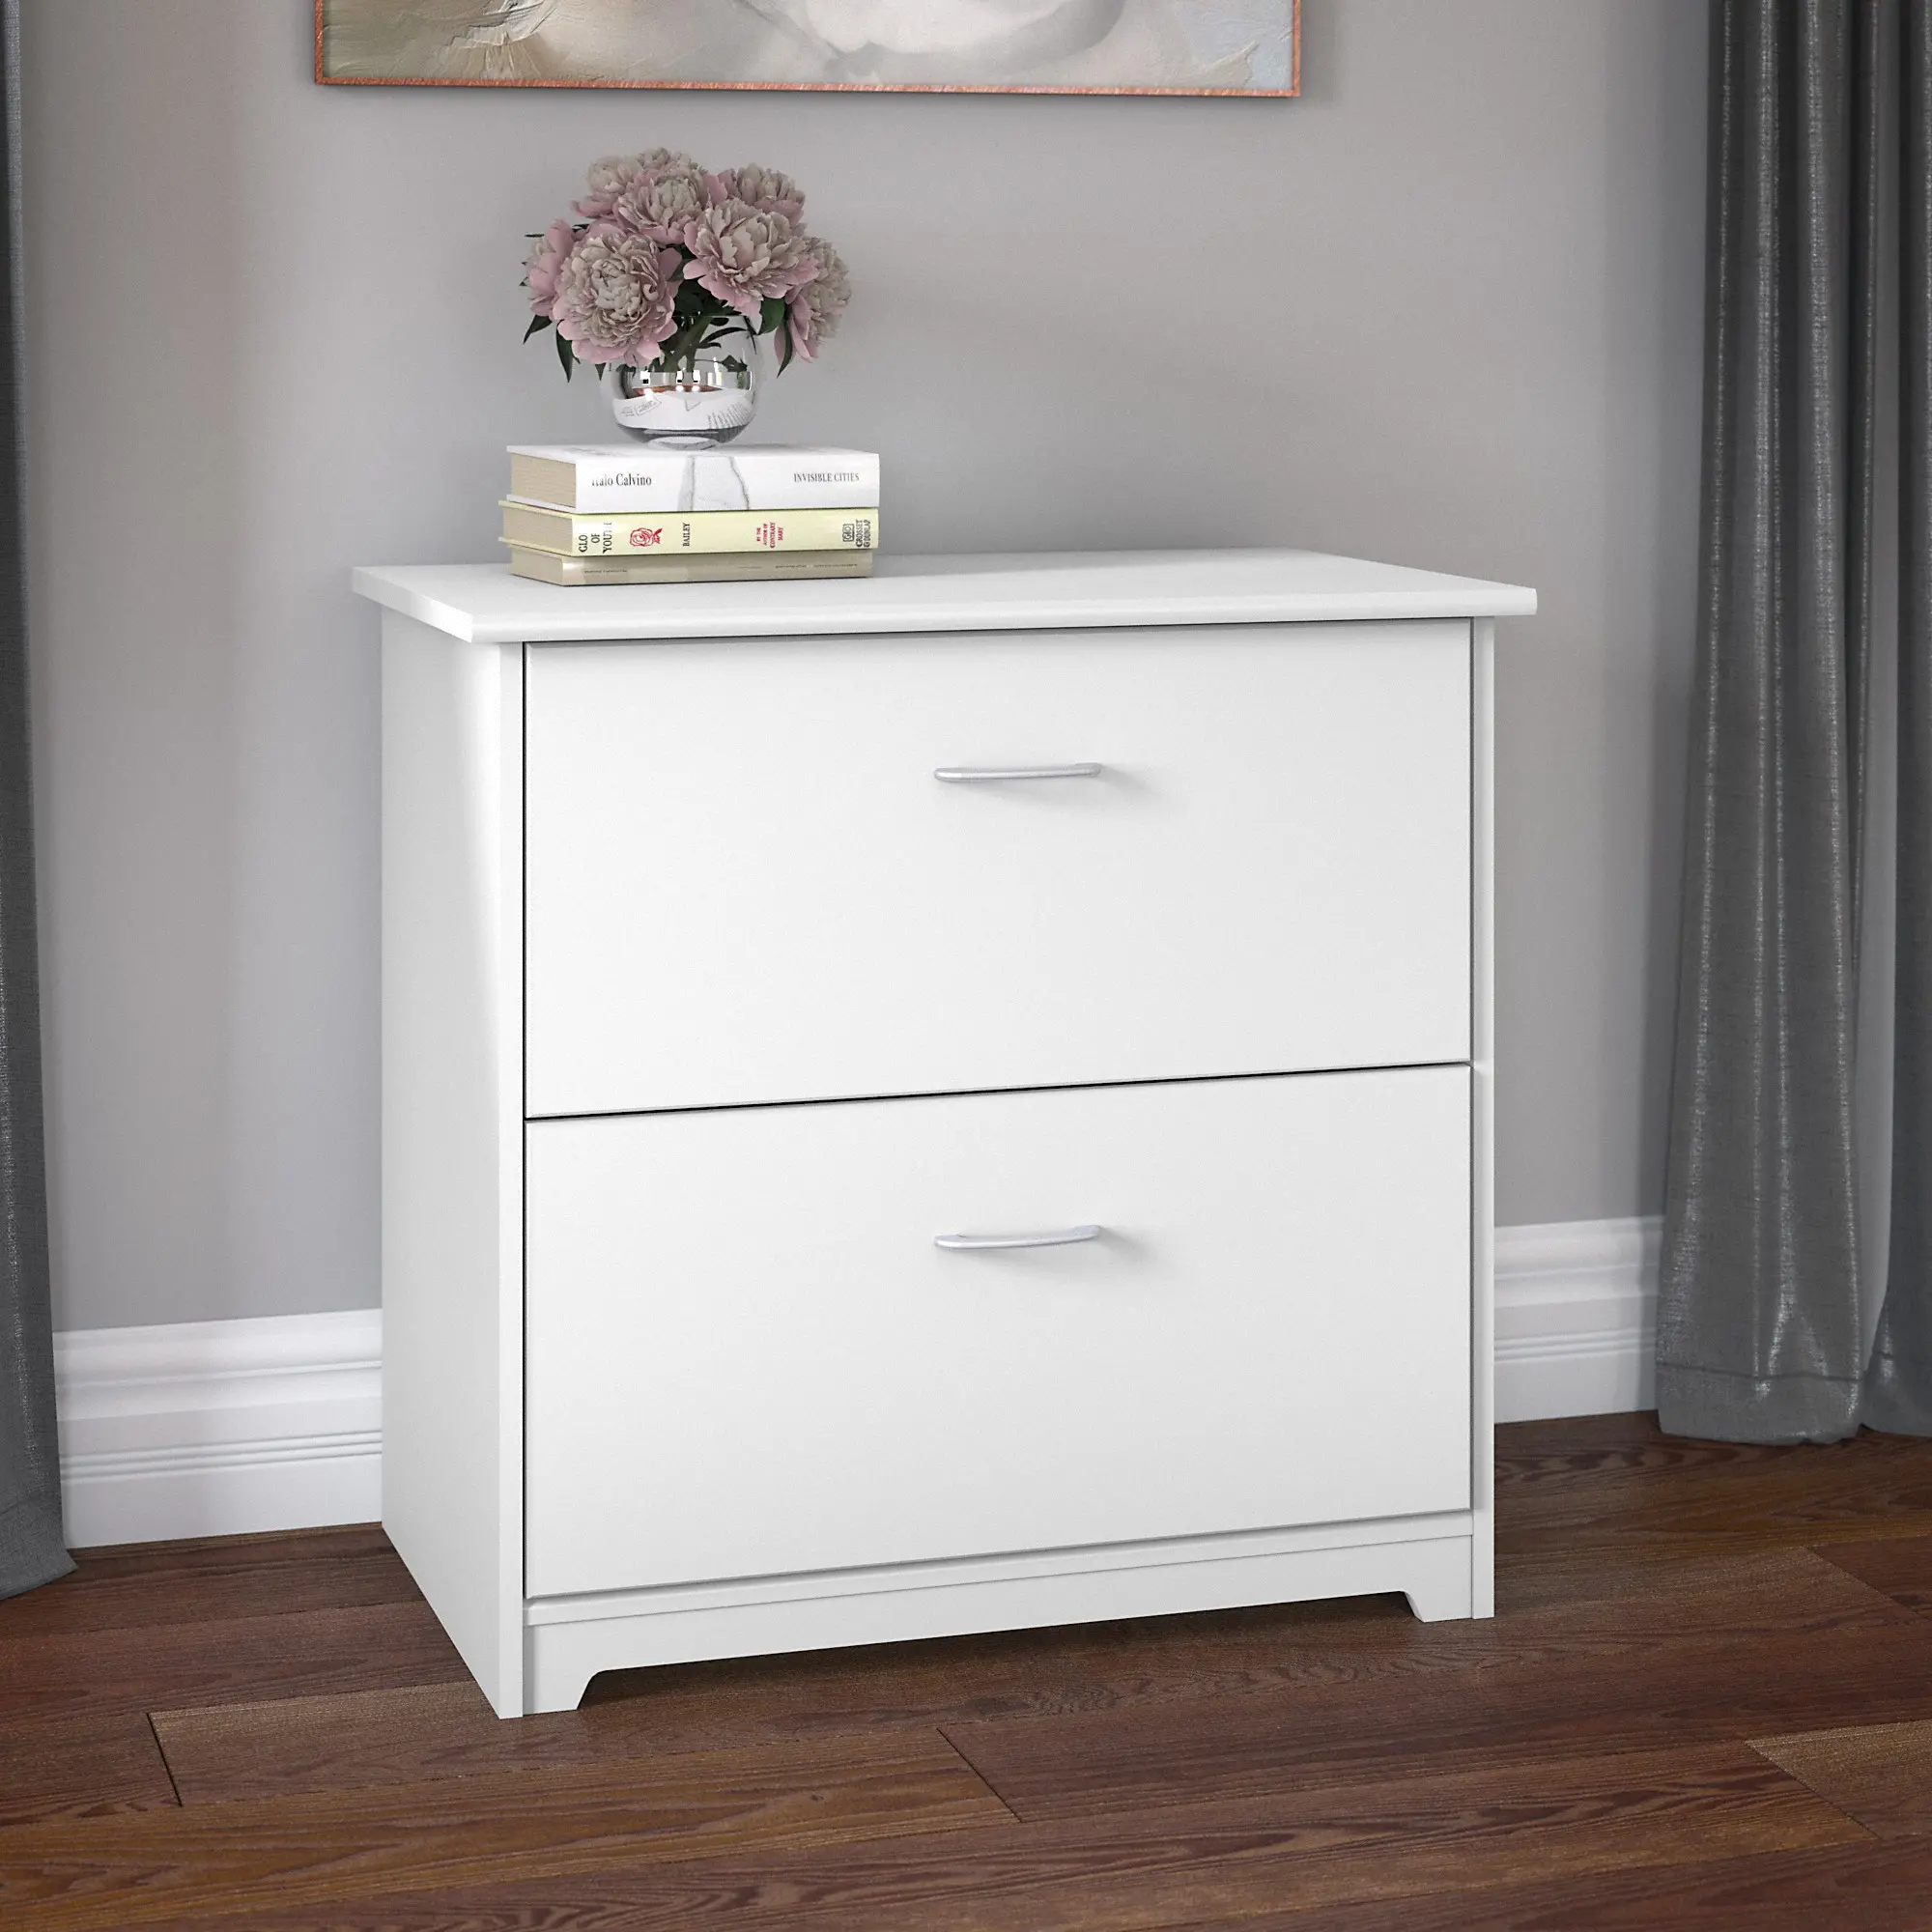 WC31980 Cabot White 2 Drawer Lateral File Cabinet - Bush F sku WC31980